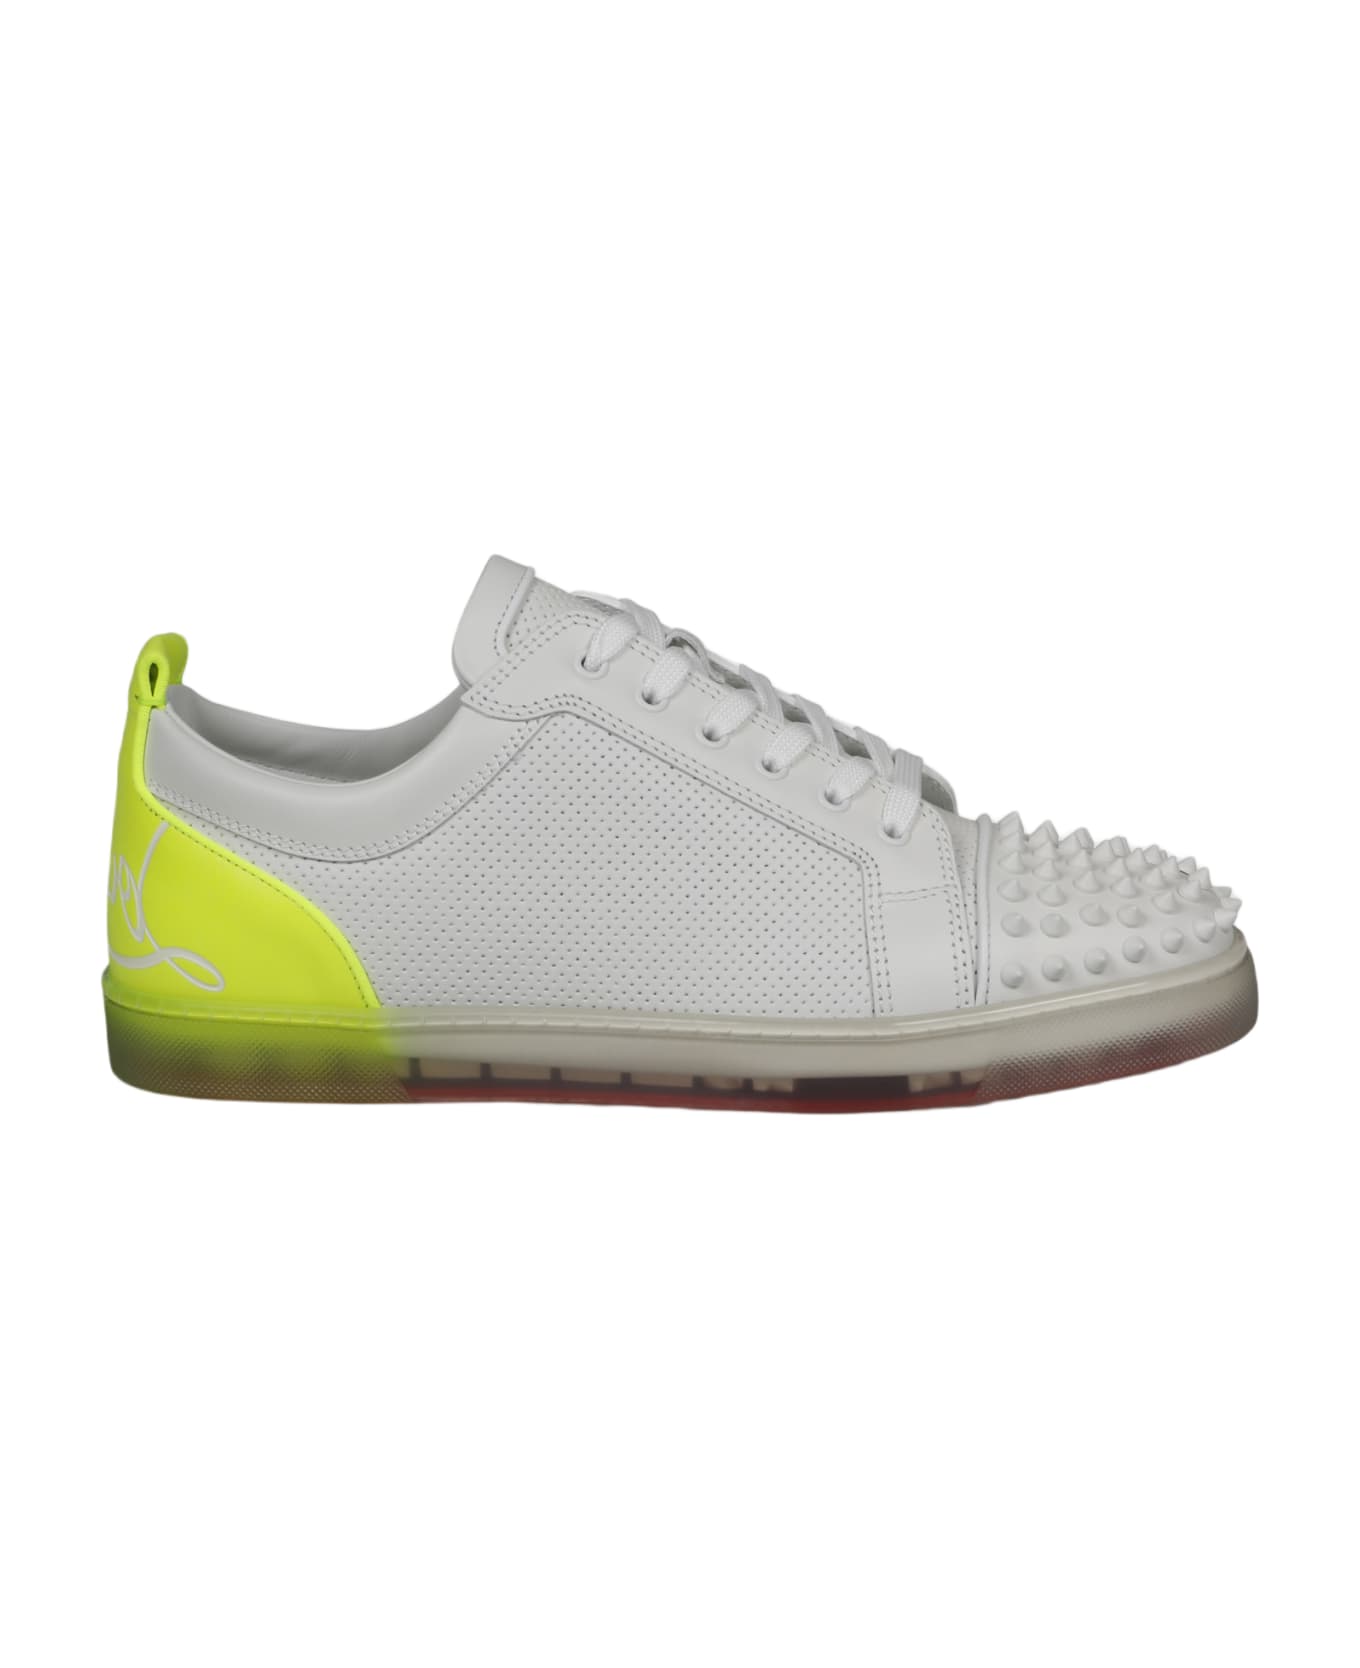 Christian Louboutin Men's Fun Louis Perforated Leather Low-Top Sneakers